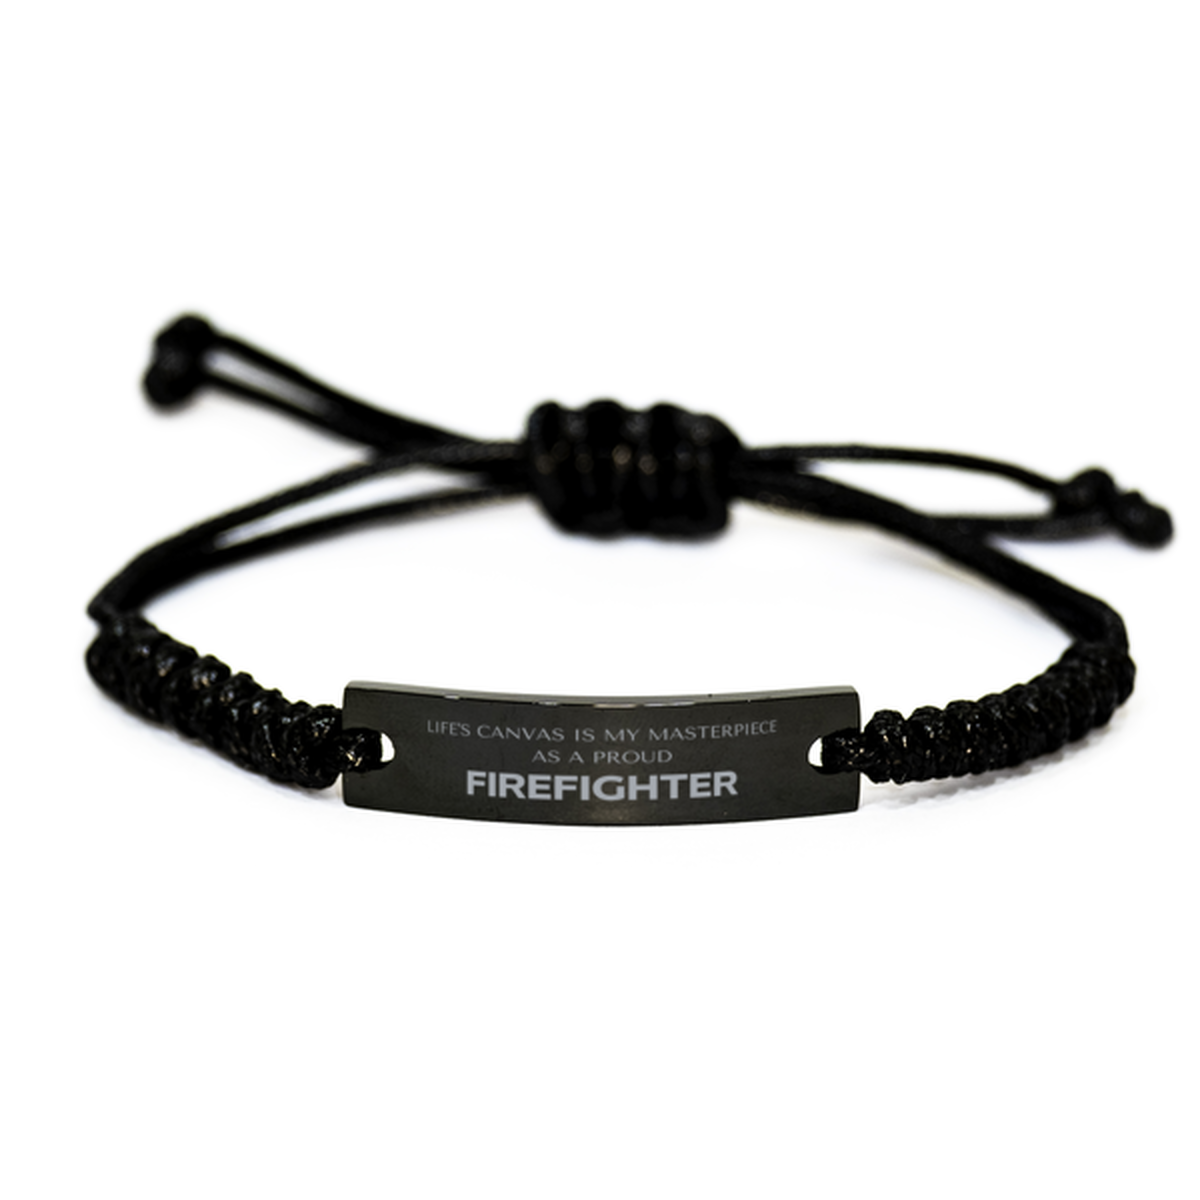 Proud Firefighter Gifts, Life's canvas is my masterpiece, Epic Birthday Christmas Unique Black Rope Bracelet For Firefighter, Coworkers, Men, Women, Friends